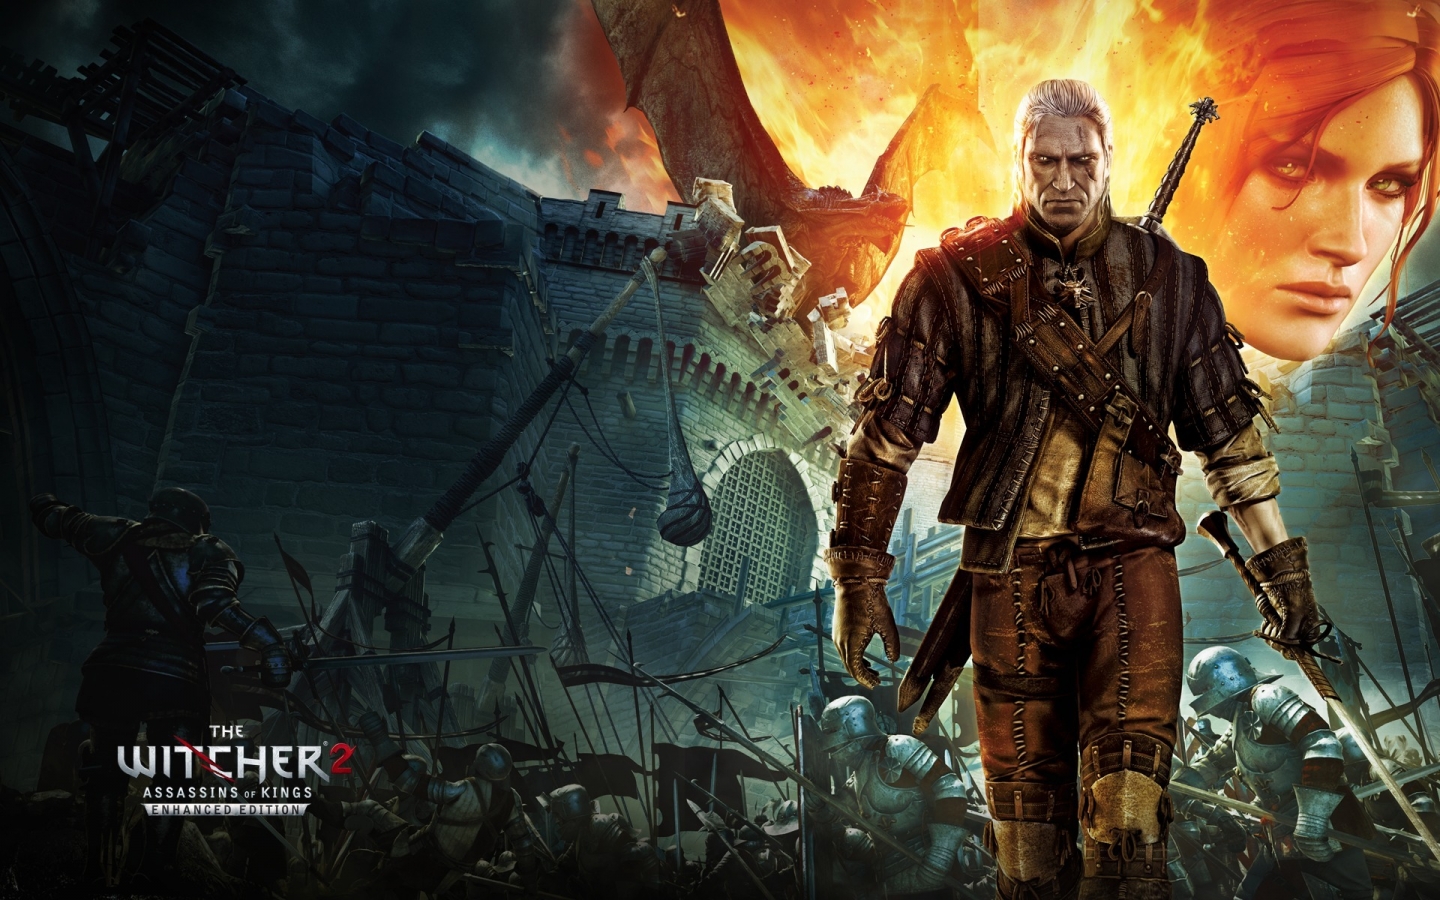 The Witcher 2 Assassins of Kings PC Game for 1440 x 900 widescreen resolution